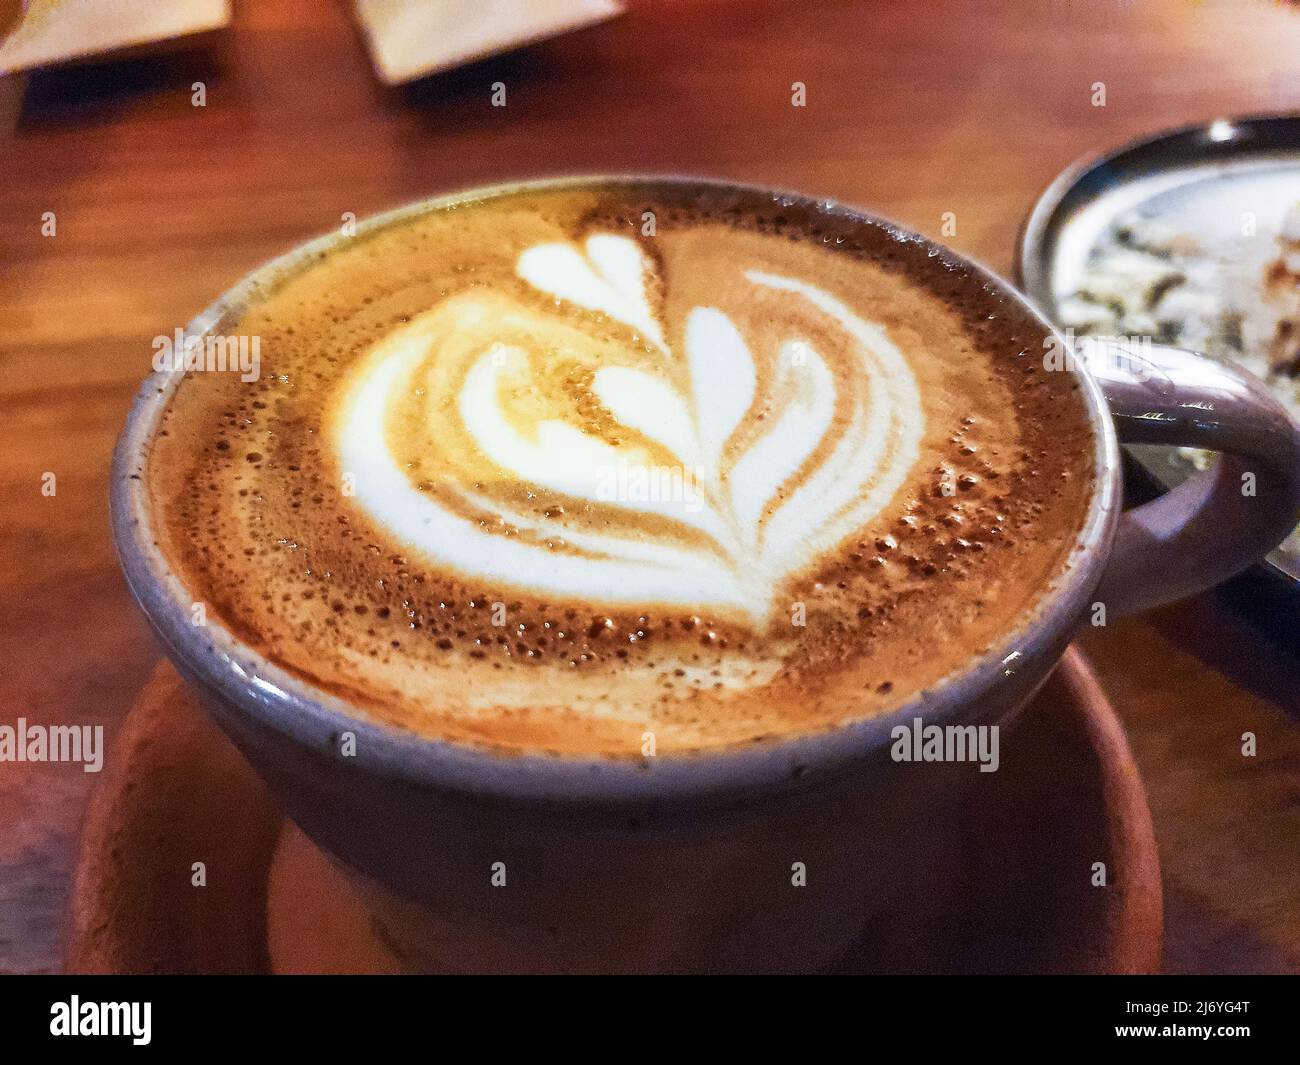 Cup of cappuccino coffee on wooden table Stock Photo